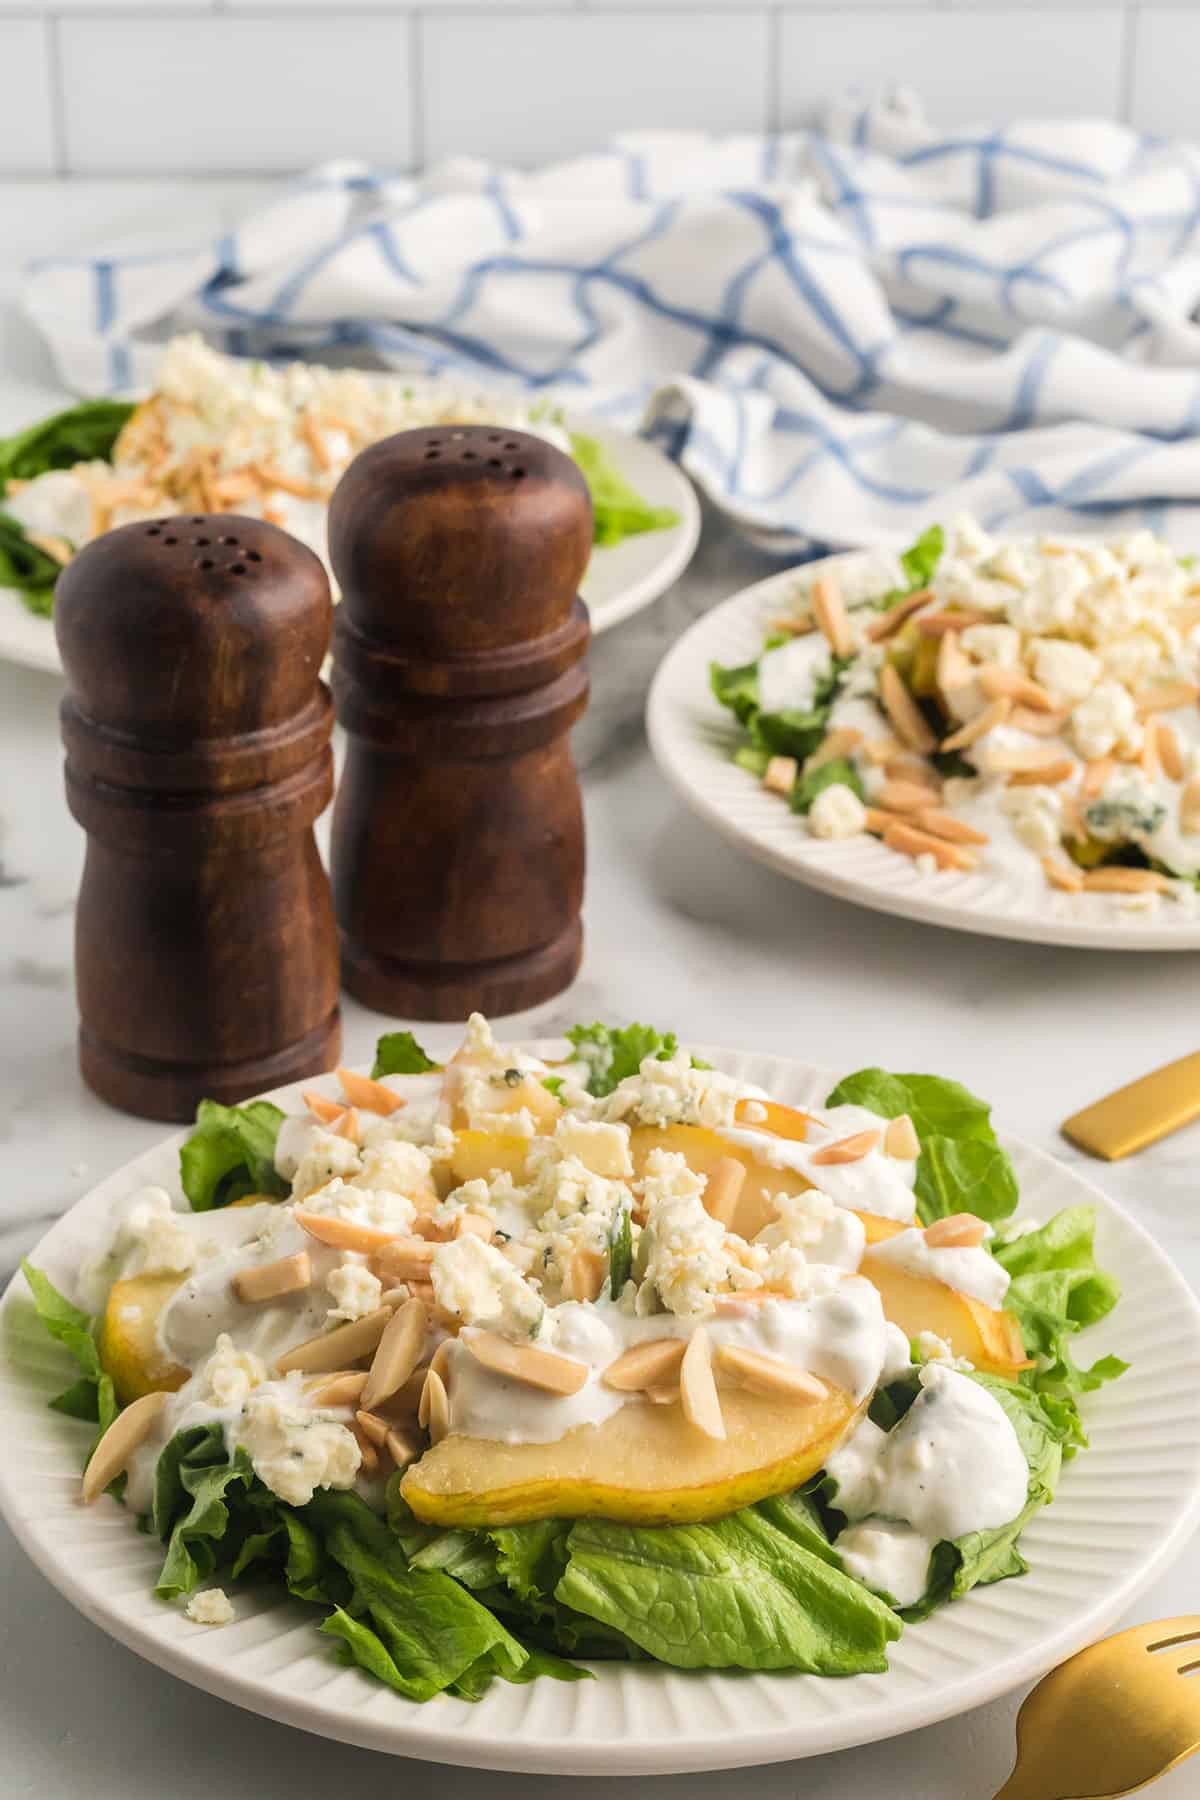 Pear and blue cheese salad on a white serving plate.